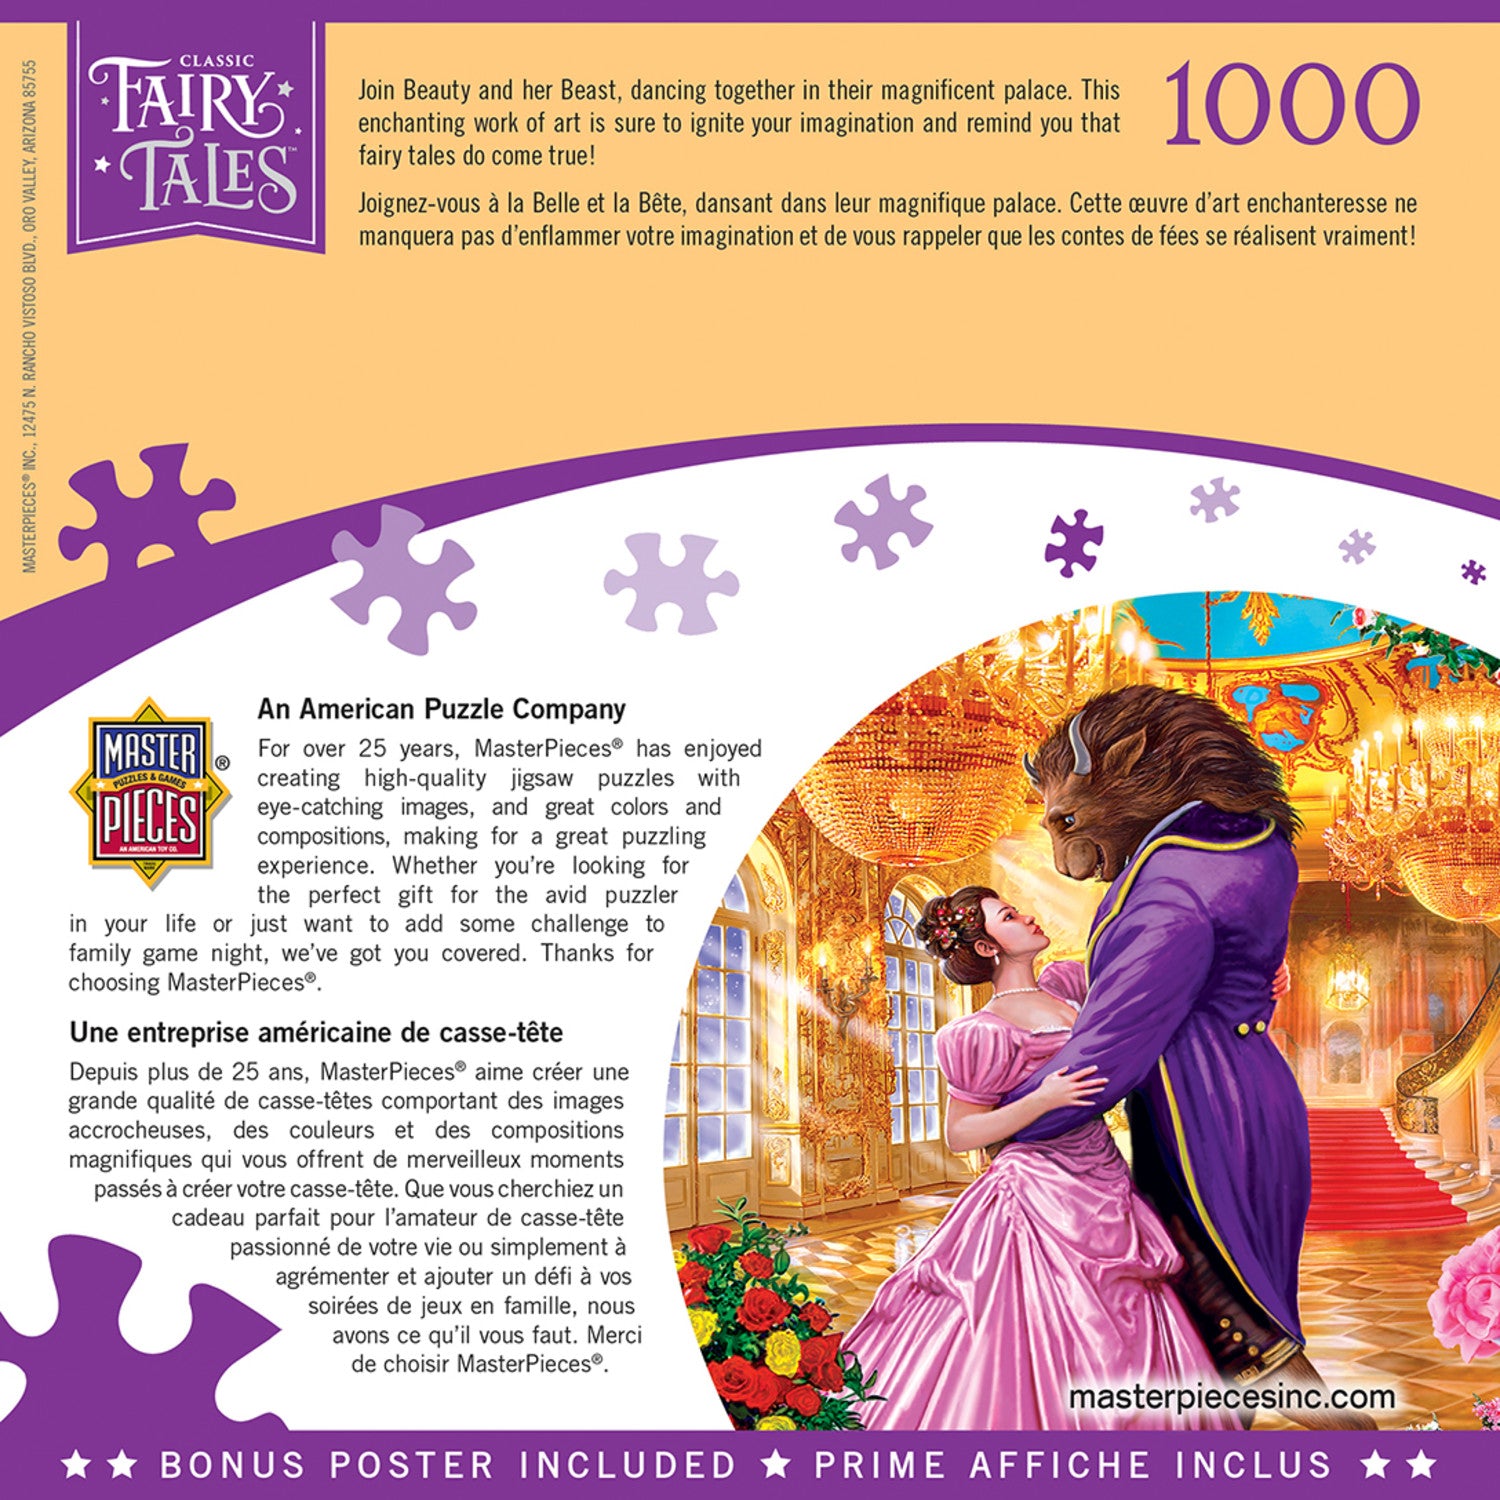 Classic Fairy Tales - Beauty and the Beast 1000 Piece Jigsaw Puzzle